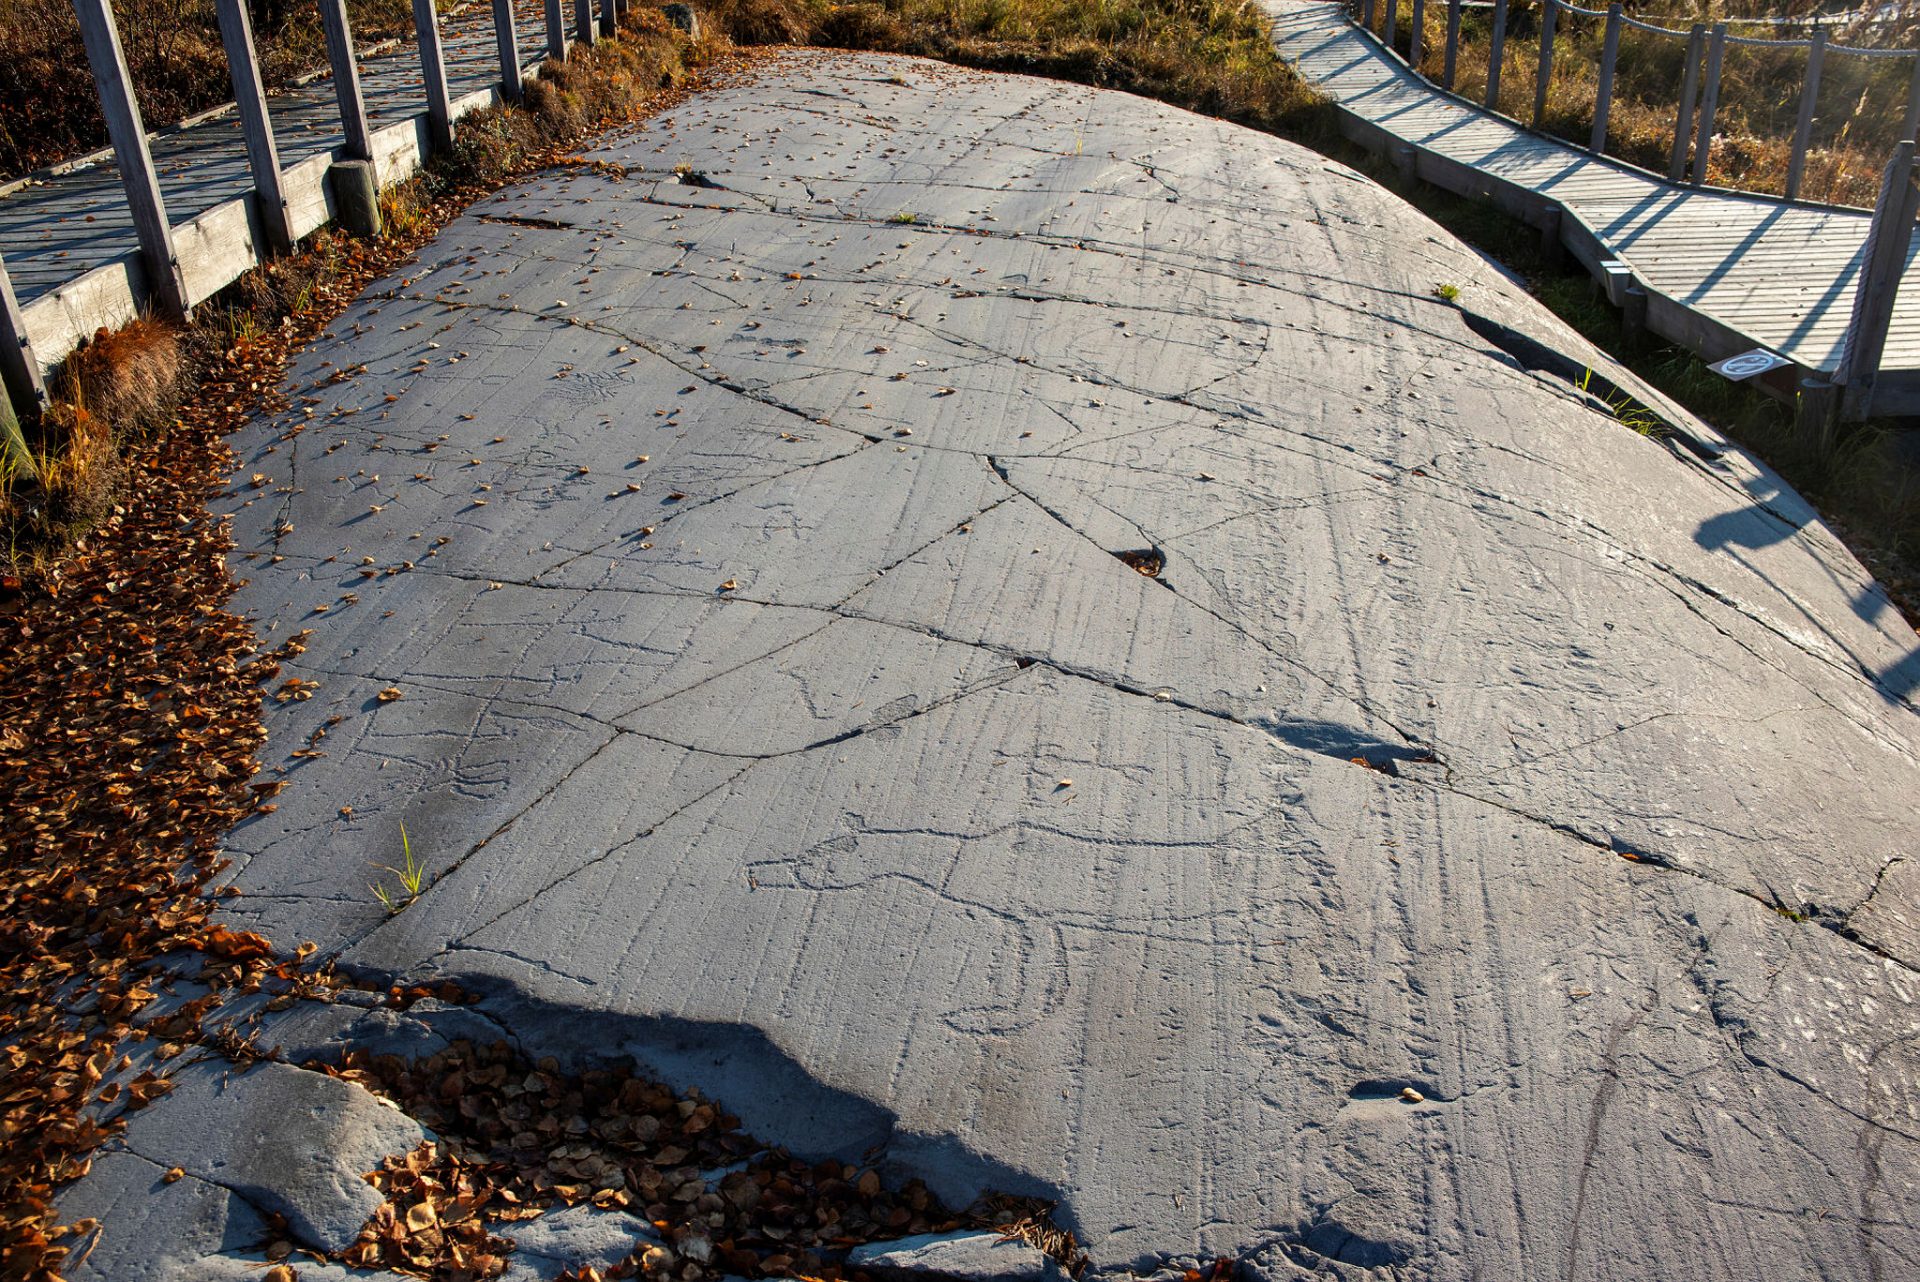 Rock carvings in Hjemmeluft in Alta: Bear on rock art surface, made accessible to the public. Photo: Arve Kjersheim, the Dircetorate for Cultural Heritage